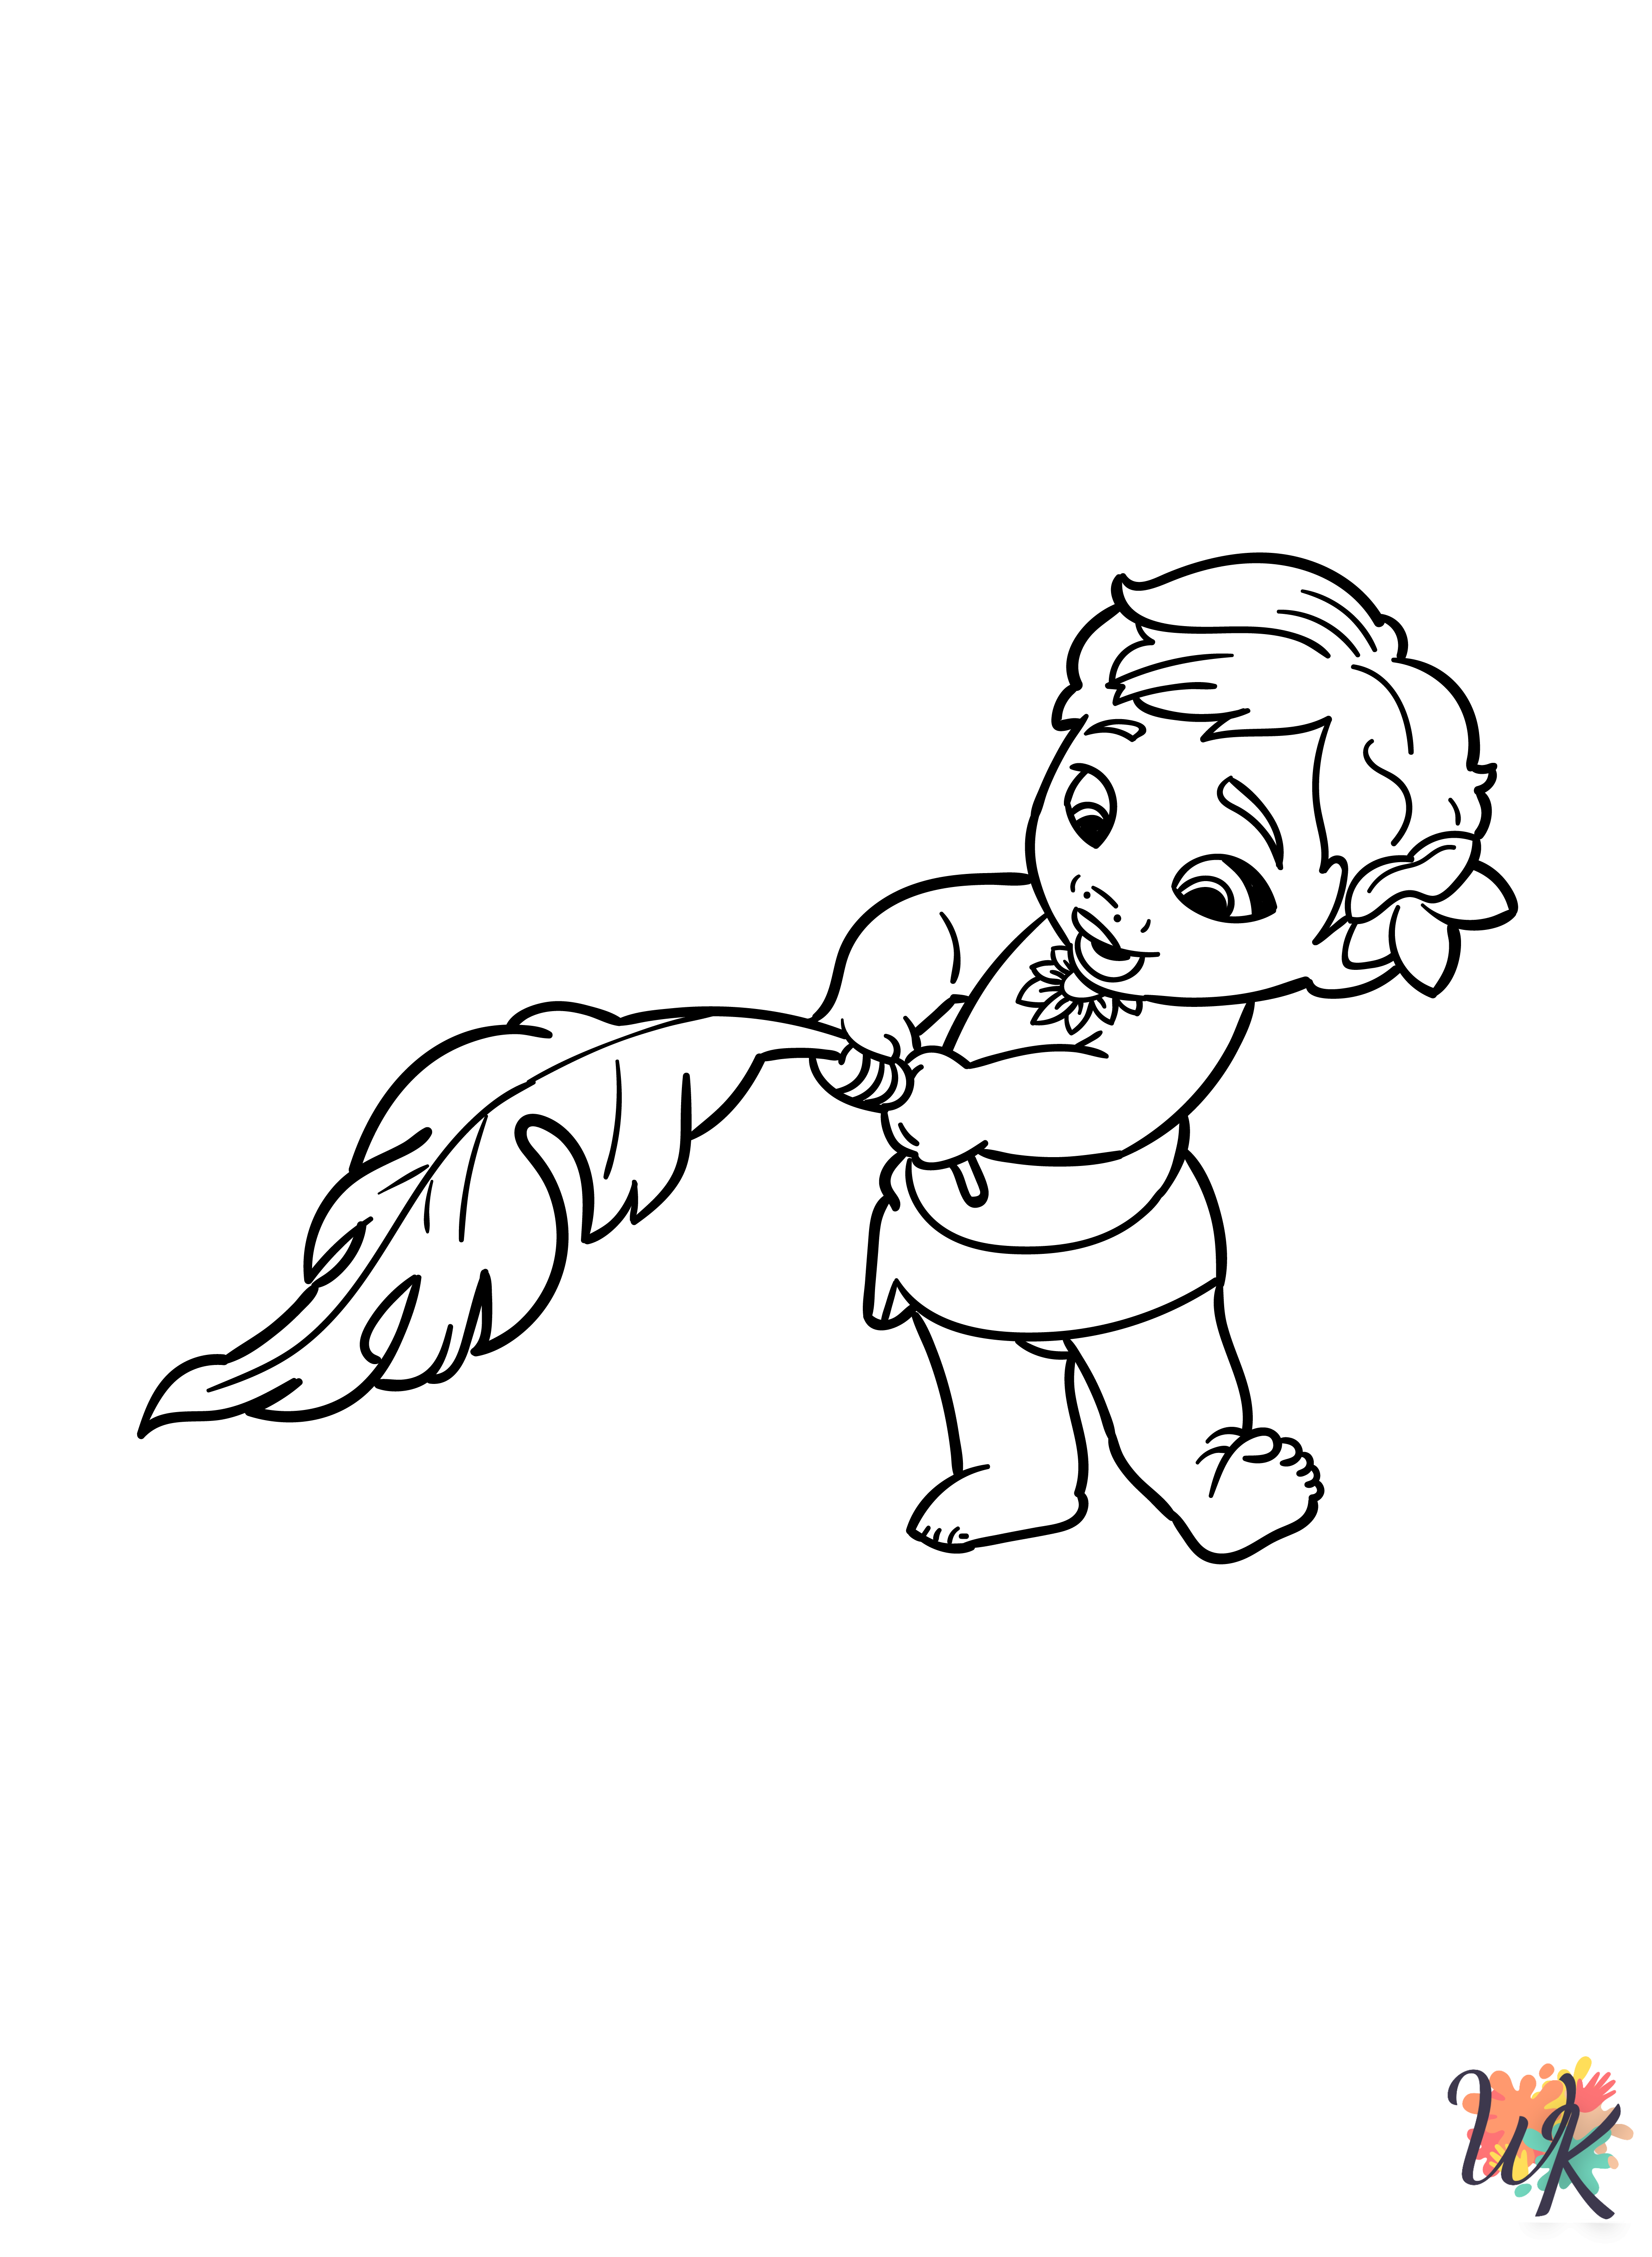 Moana cards coloring pages